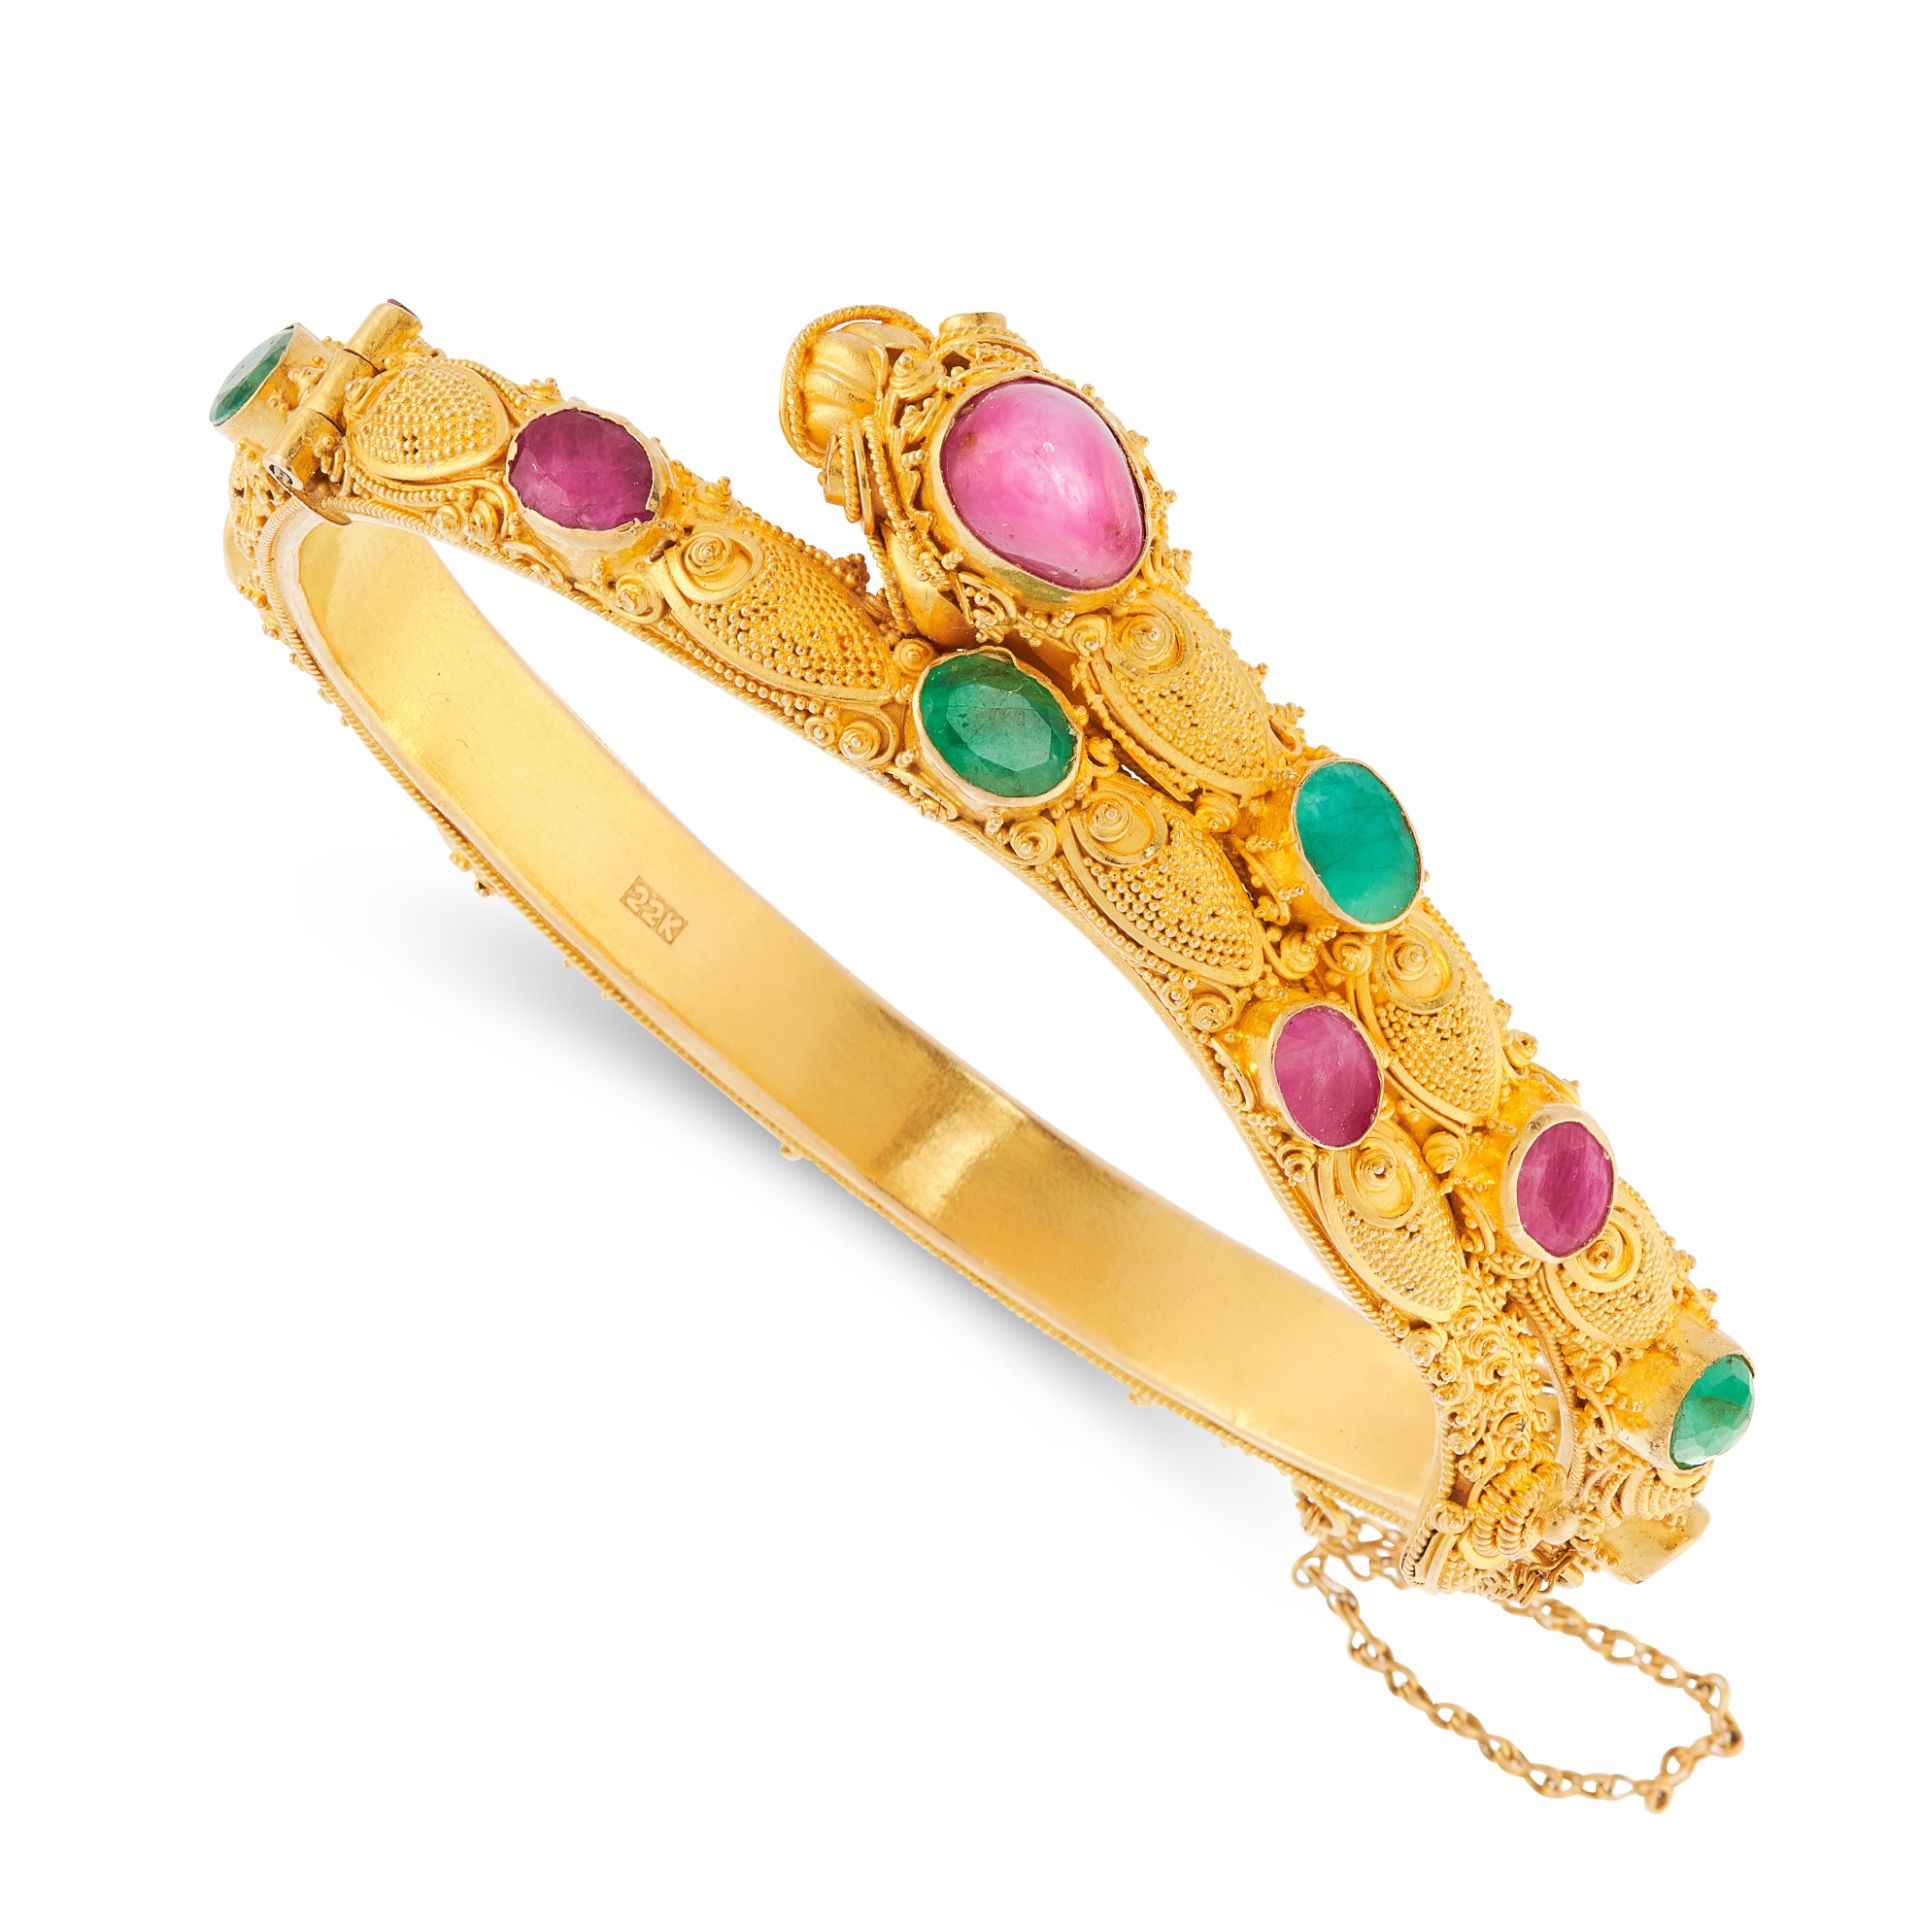 A RUBY AND EMERALD CHINESE DRAGON BANGLE in 22ct yellow gold, designed as the body of a dragon